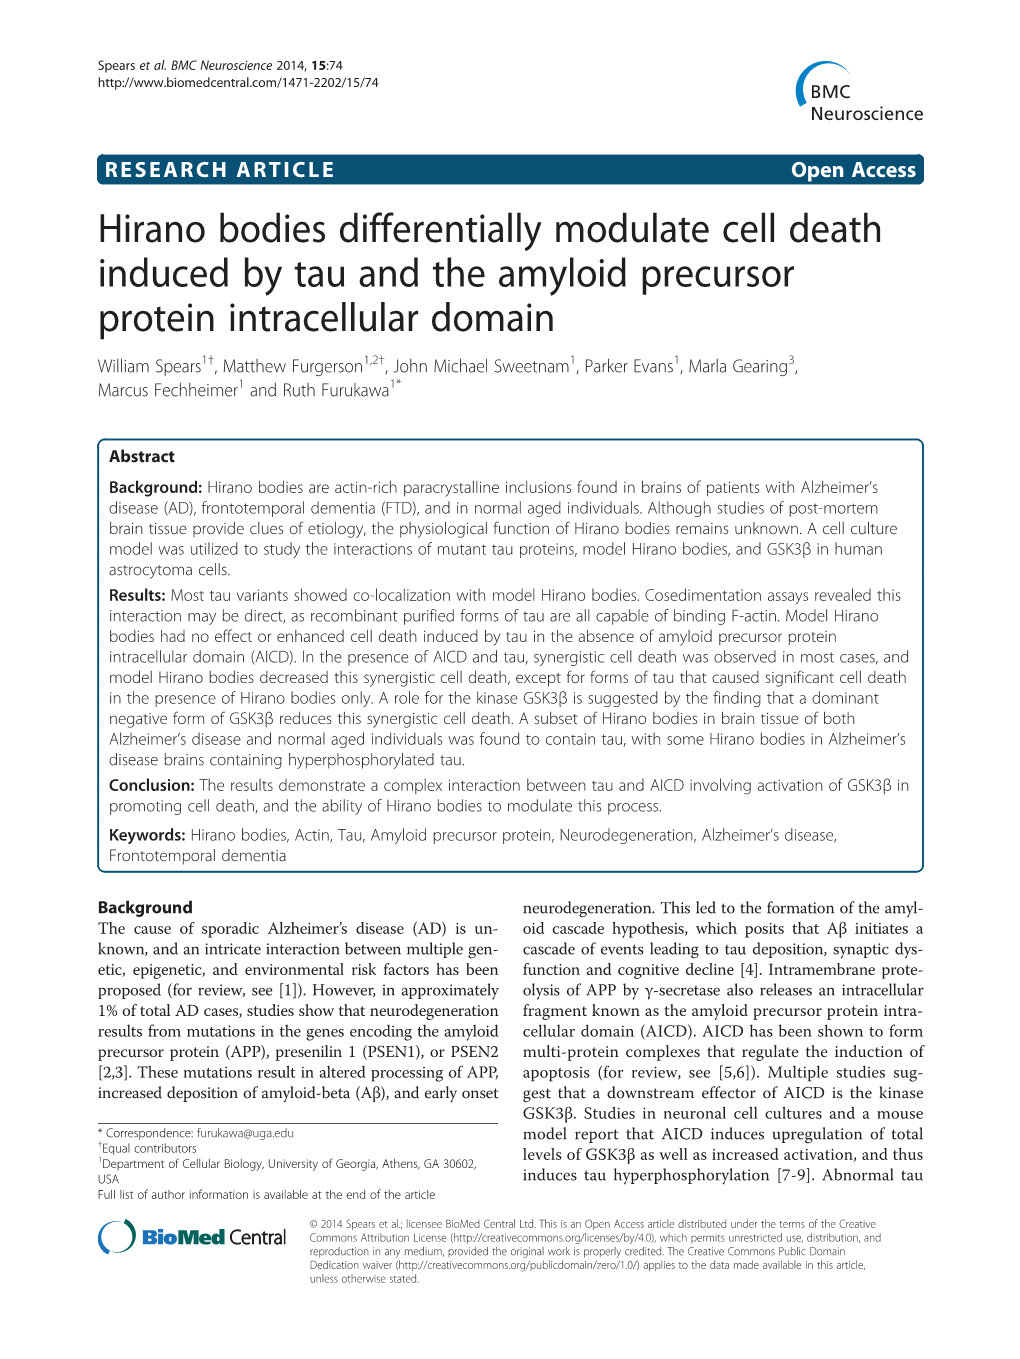 Hirano Bodies Differentially Modulate Cell Death Induced